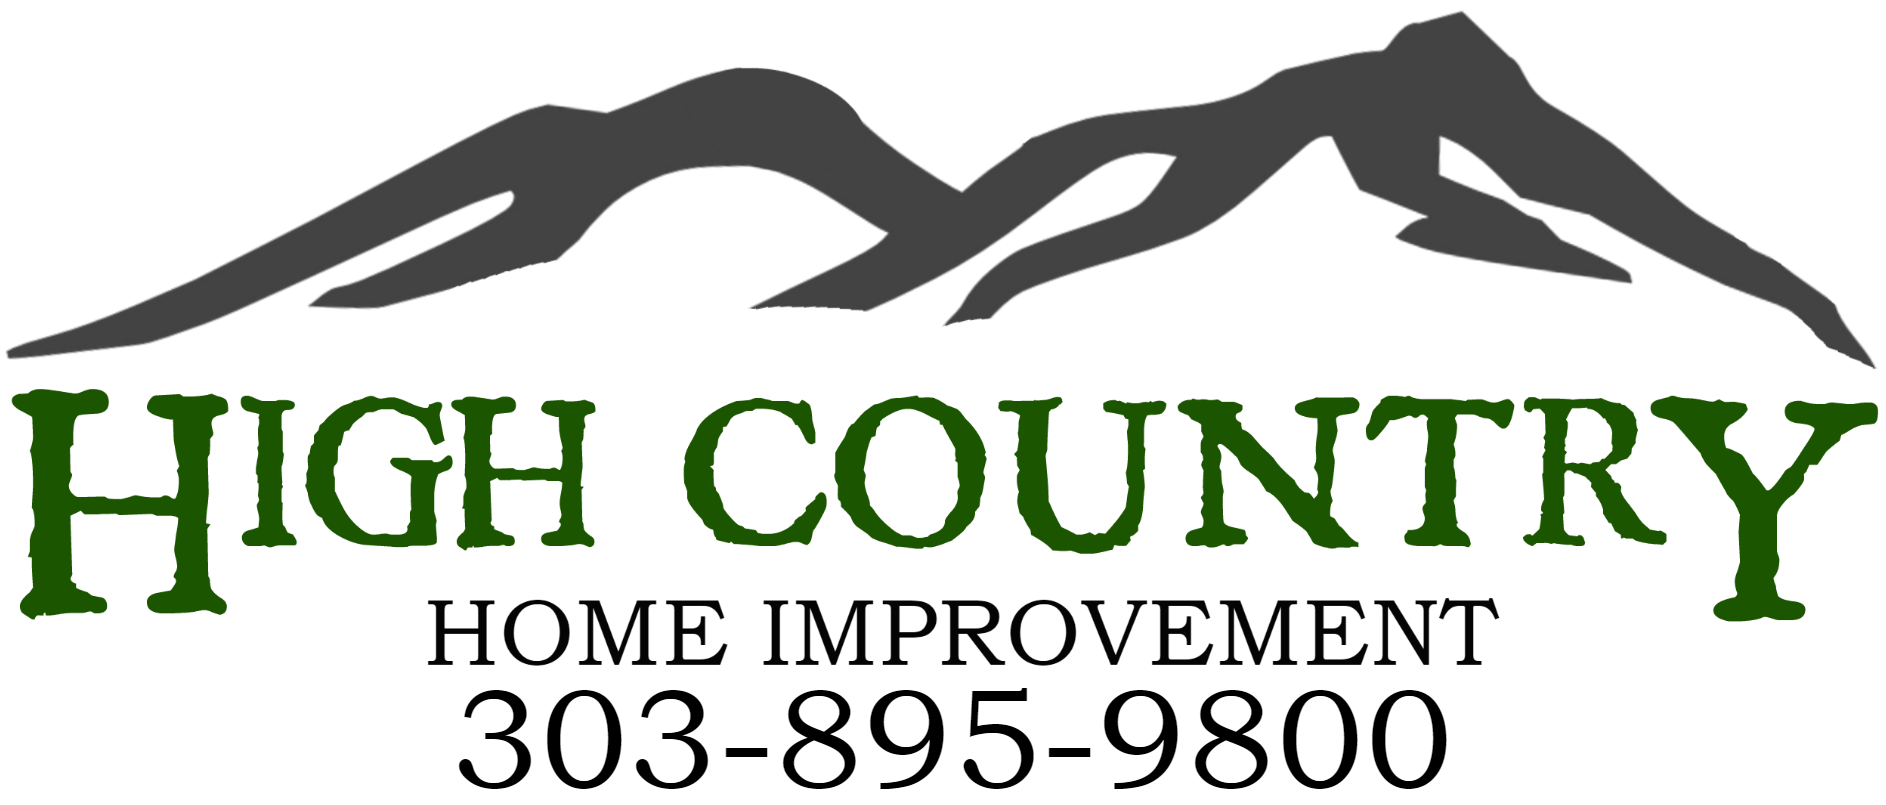 High Country Home Improvement